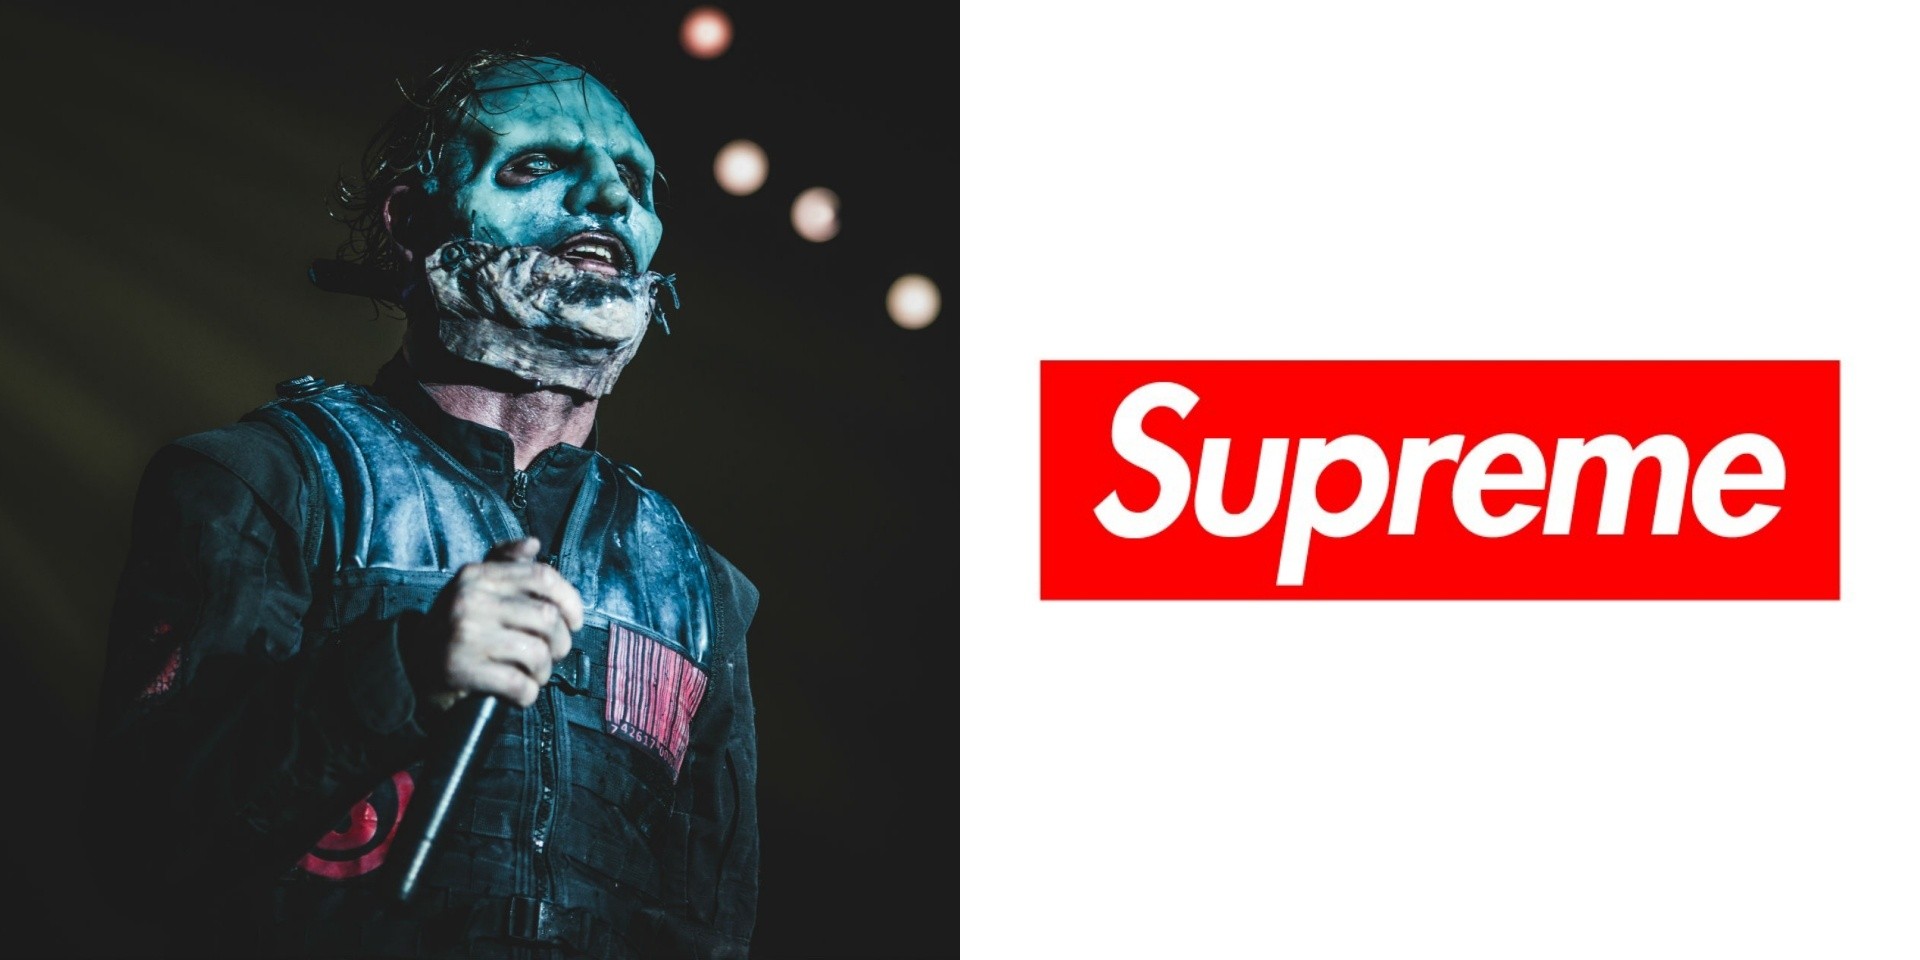 Could Slipknot be releasing a collaboration with Supreme?